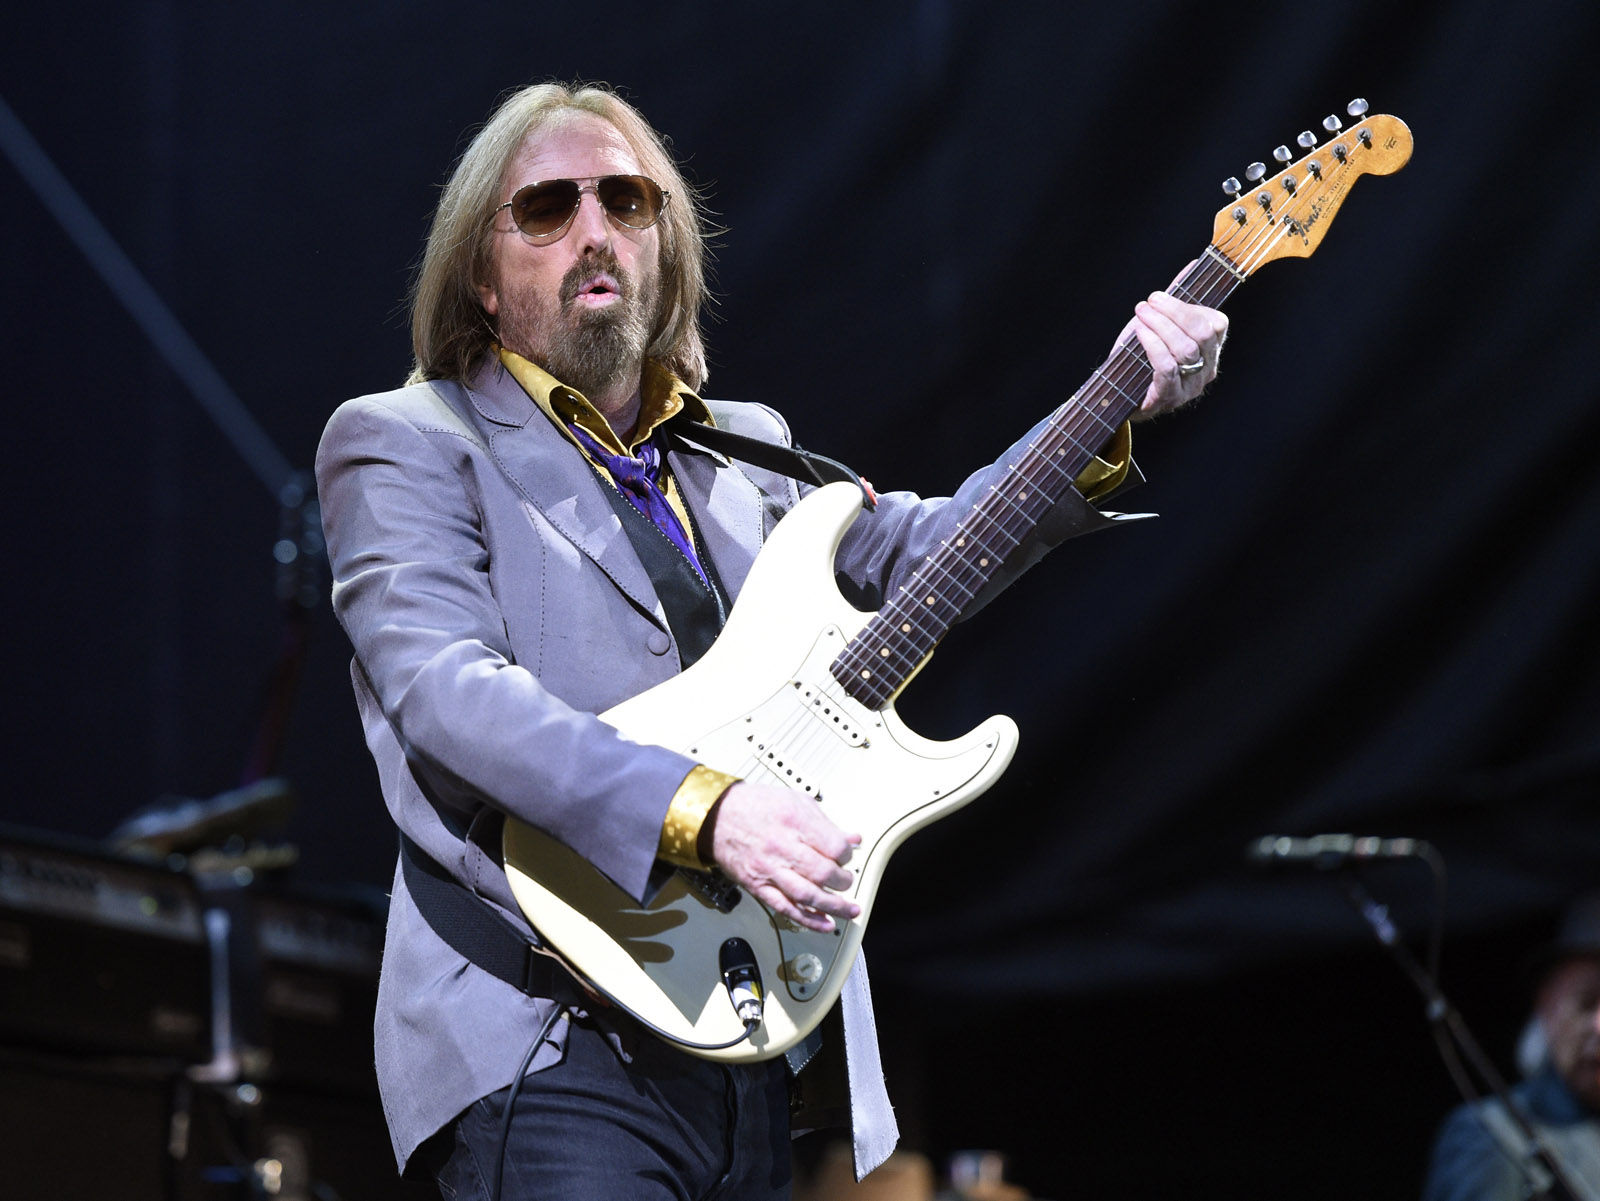 Tom Petty performs with the Heartbreakers during their headlining set on day one of the inaugural 2017 Arroyo Seco Music Festival on Saturday, June 24, 2017, in Pasadena, Calif. (Photo by Chris Pizzello/Invision/AP)